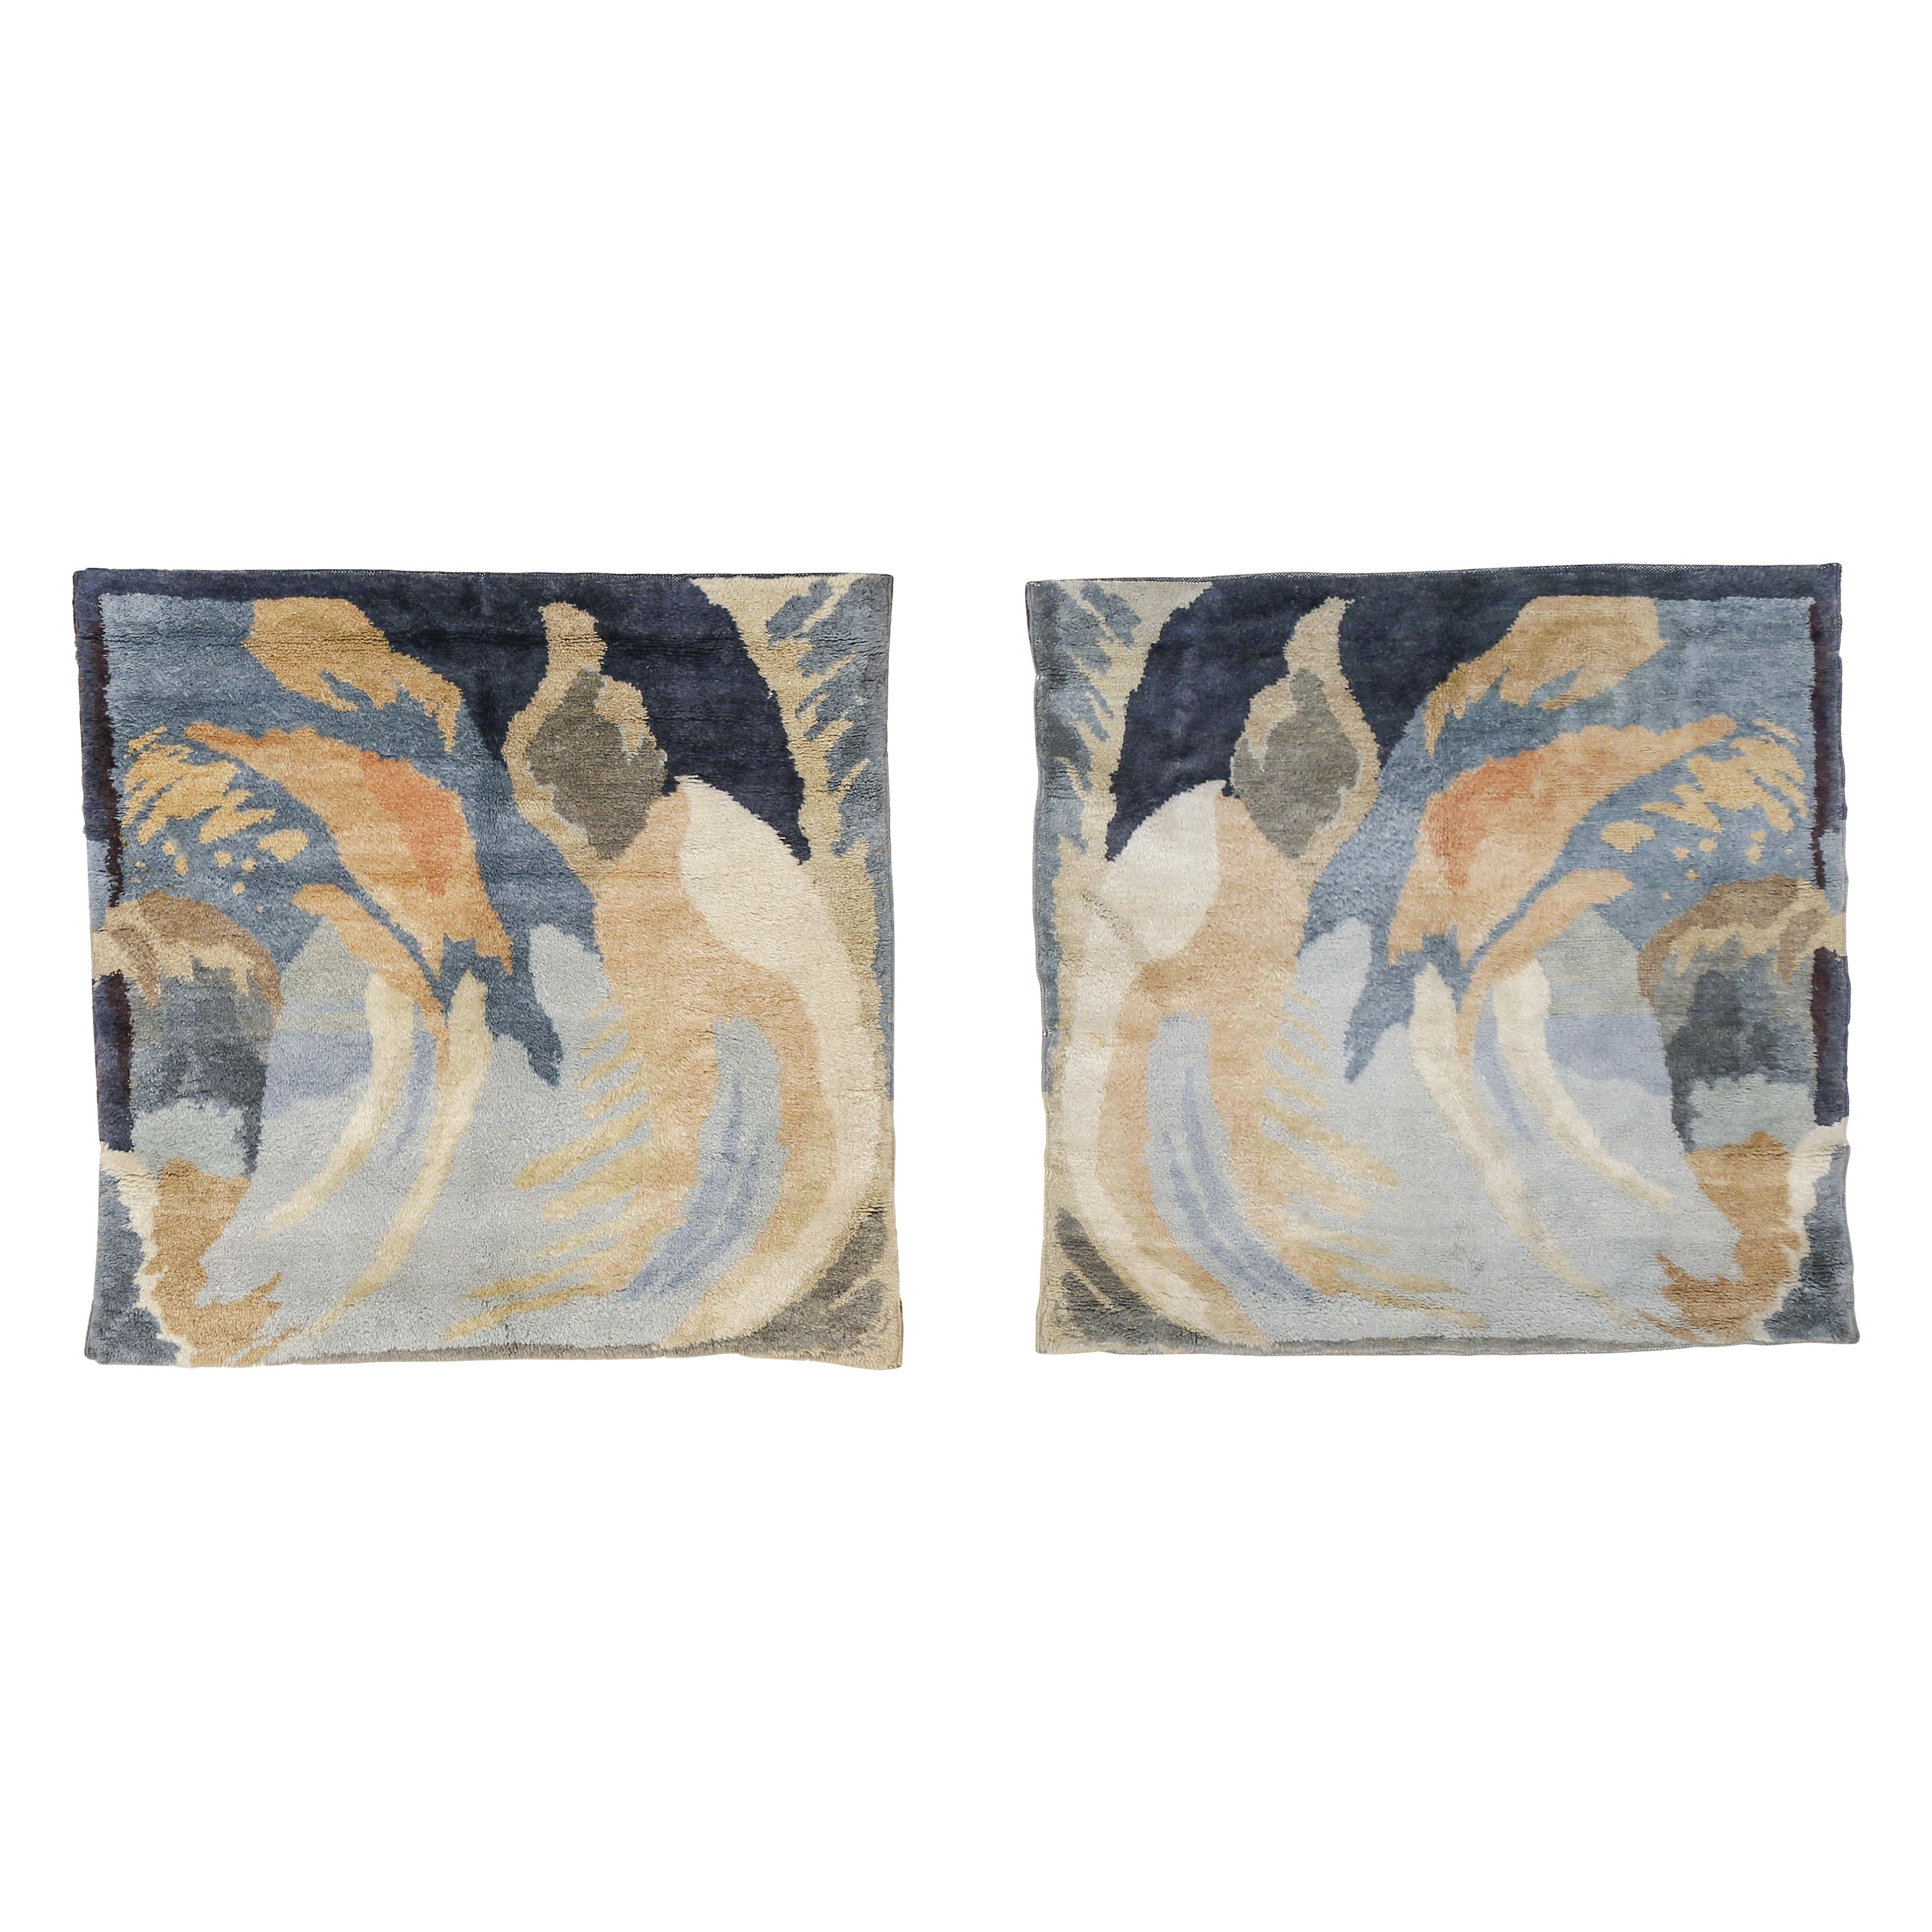 Pair of French Art Deco Rugs Designed by Jean Burkhalter for Pierre Chareau For Sale